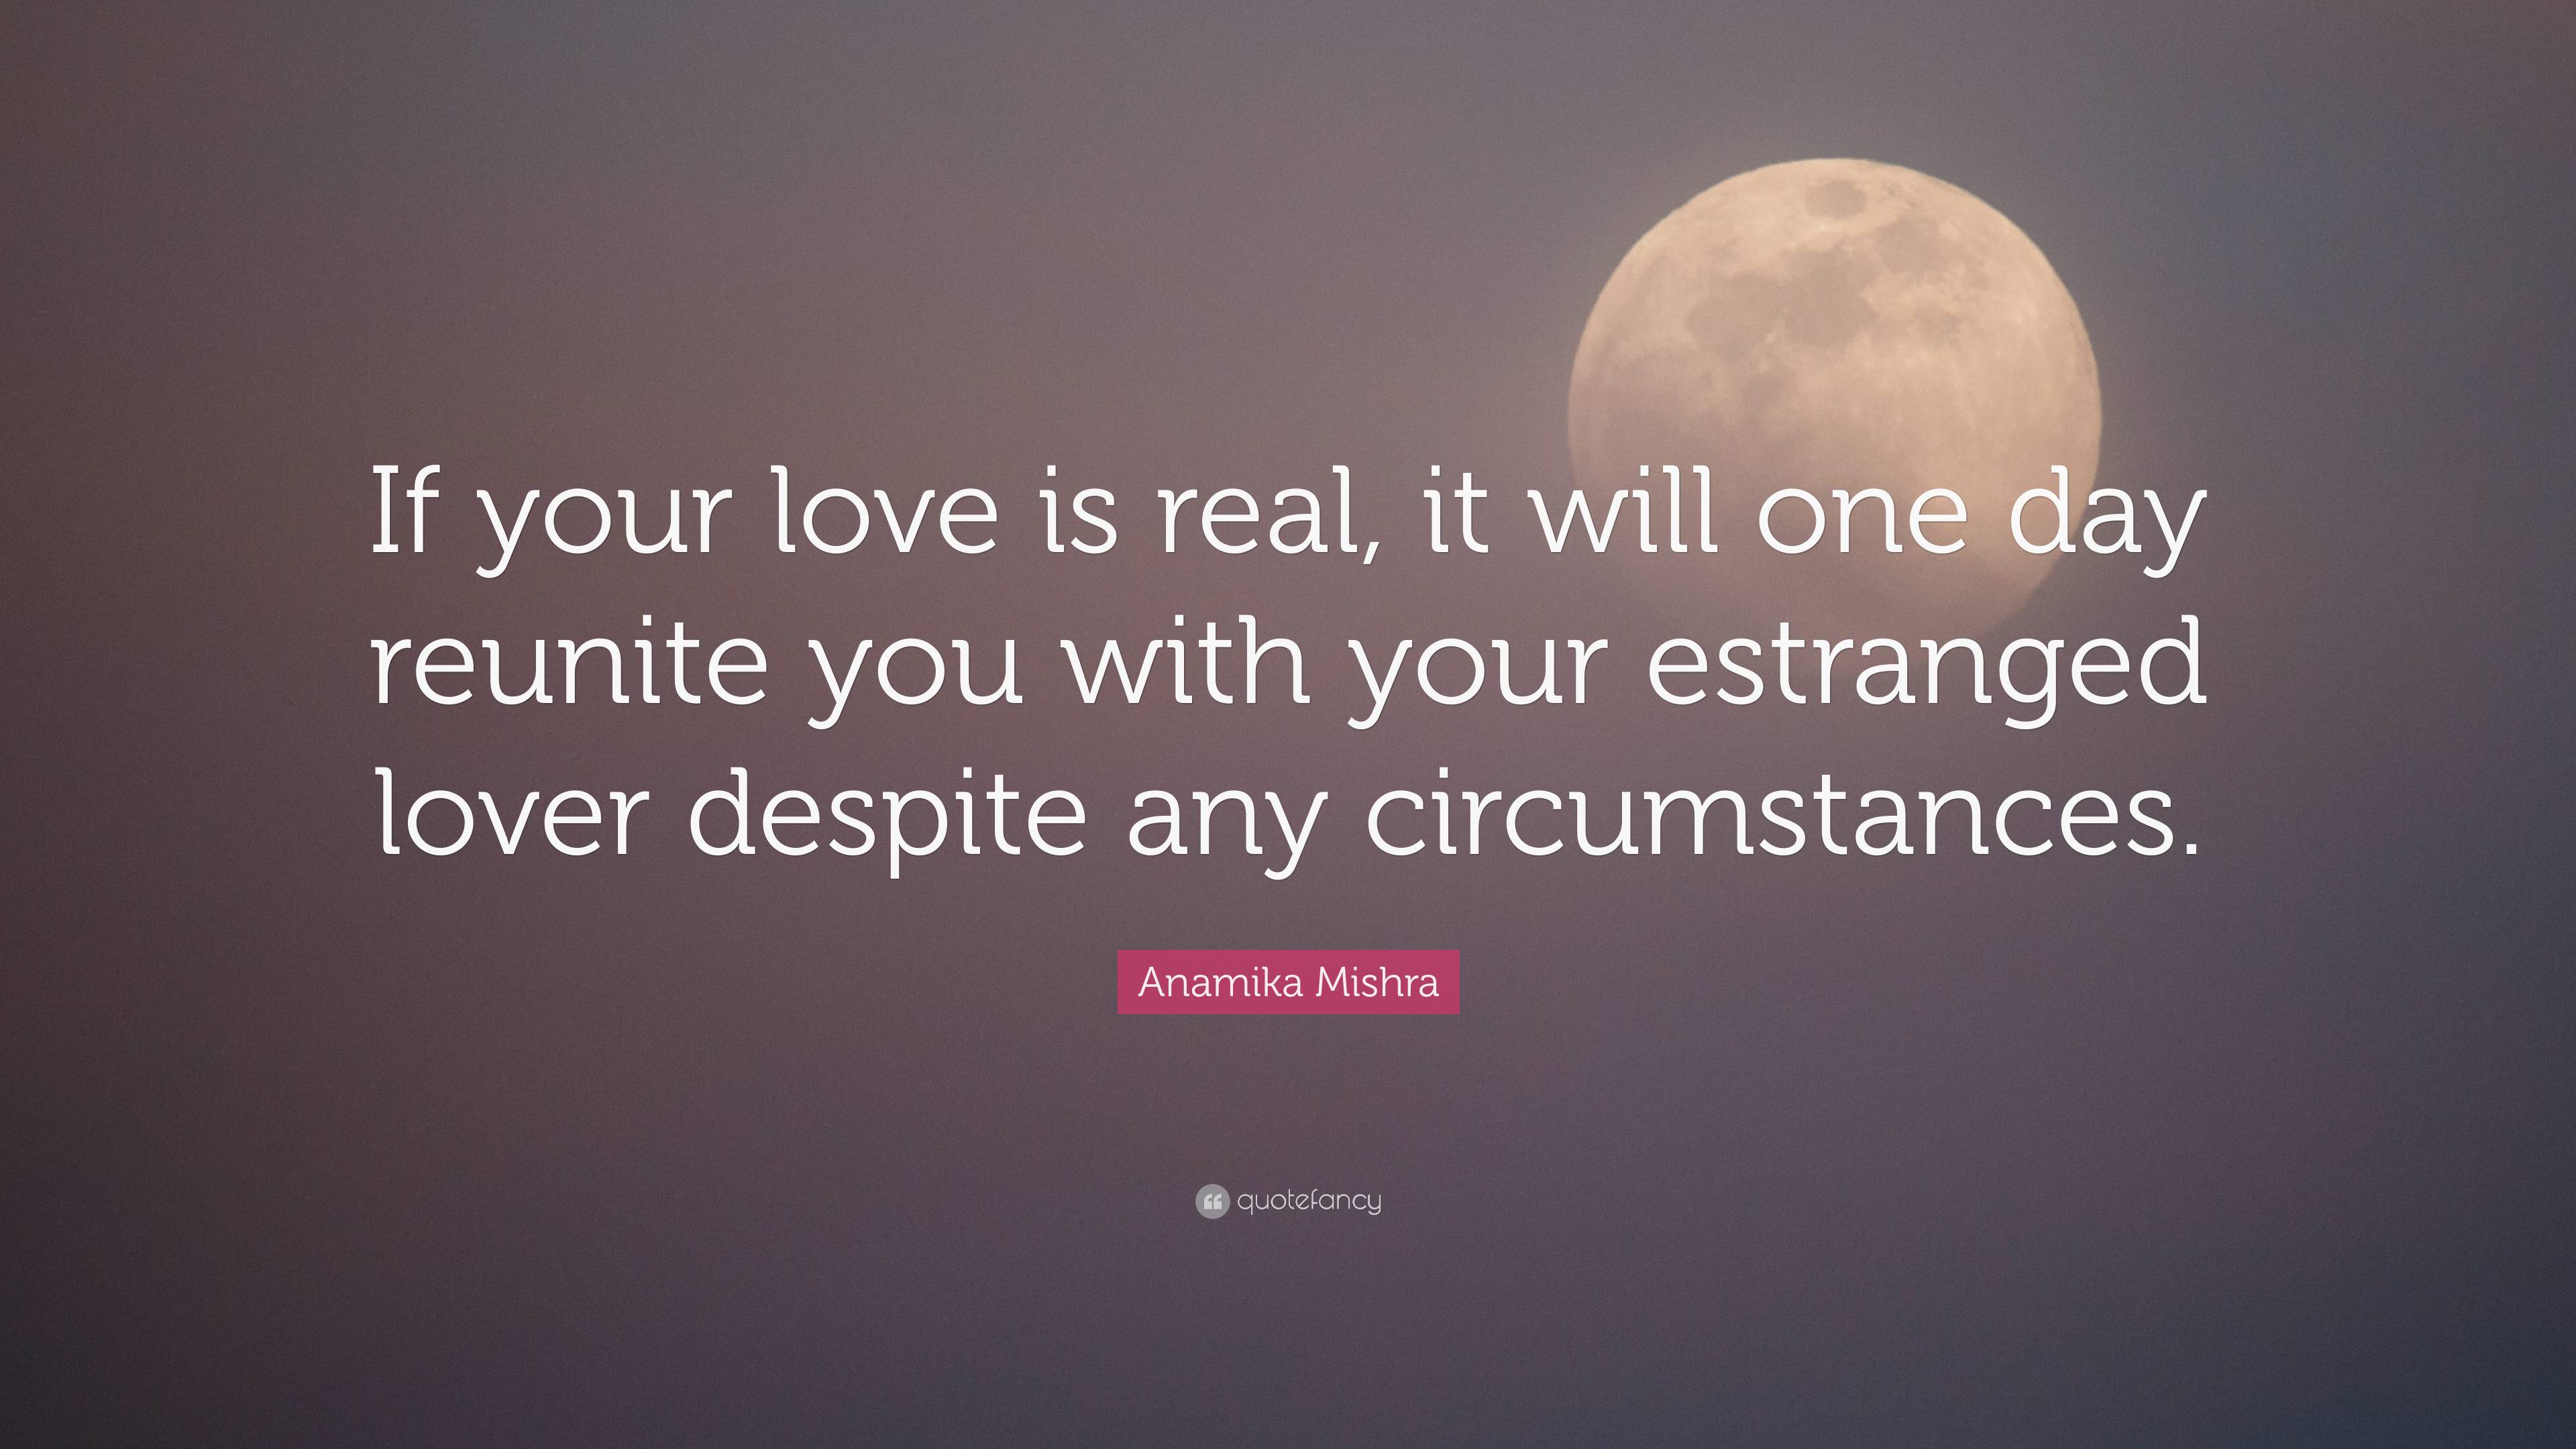 Anamika Mishra Quote: “If your love is real, it will one day reunite you  with your